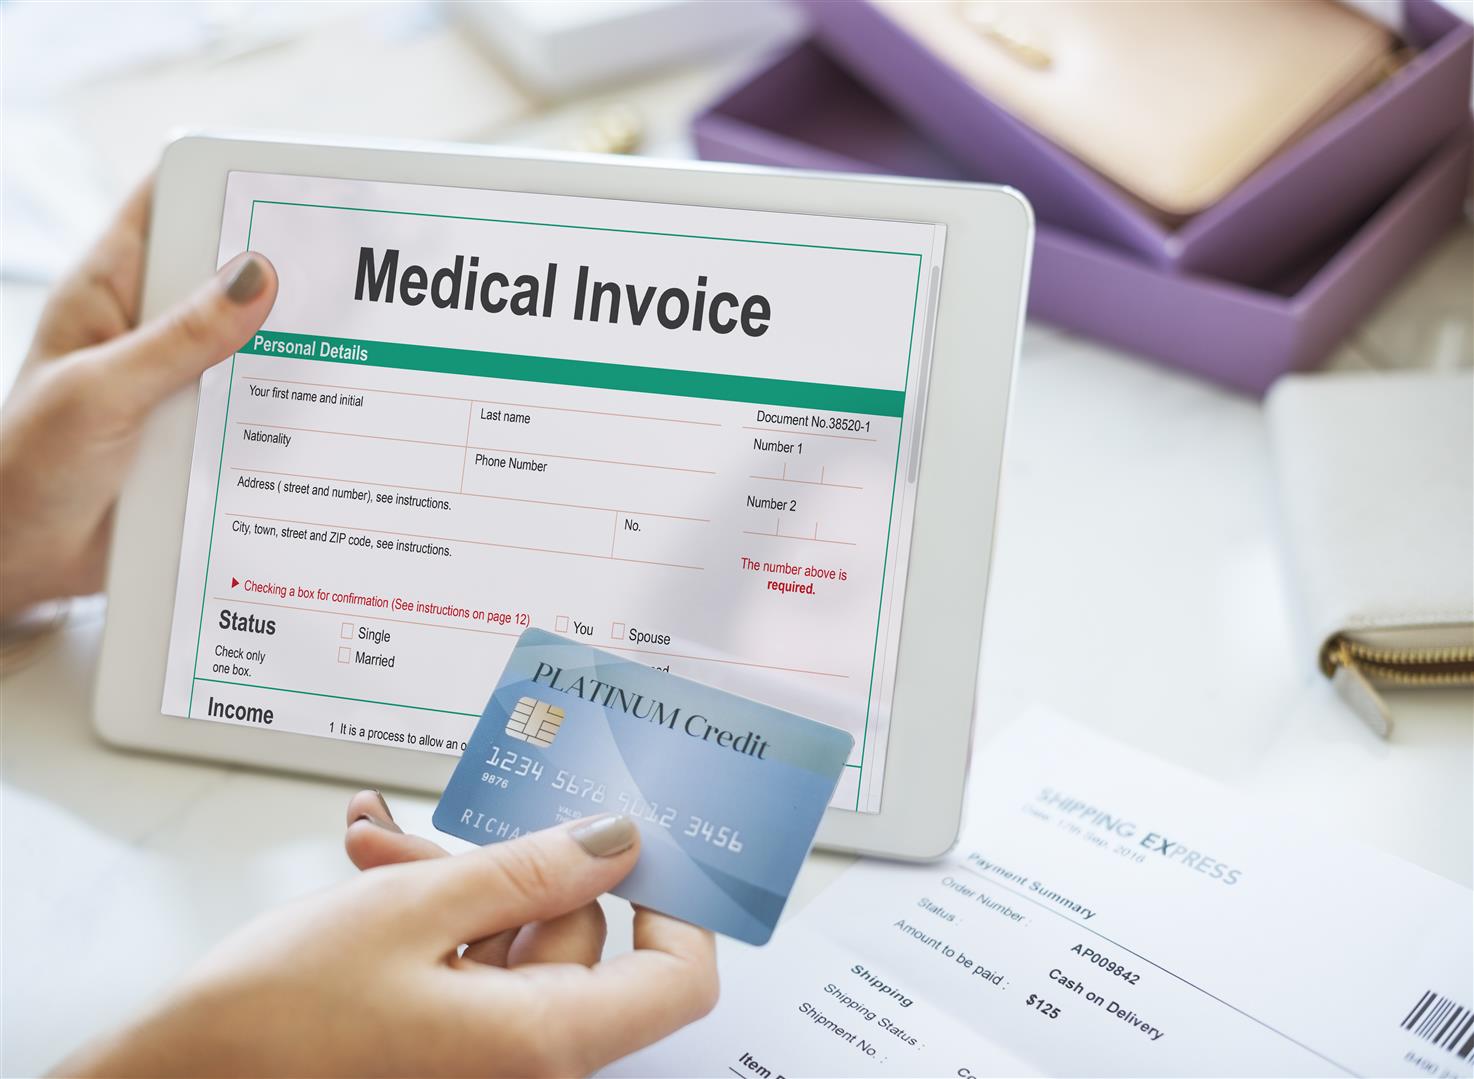 Direct medical expense reimbursement system from foreign governments.